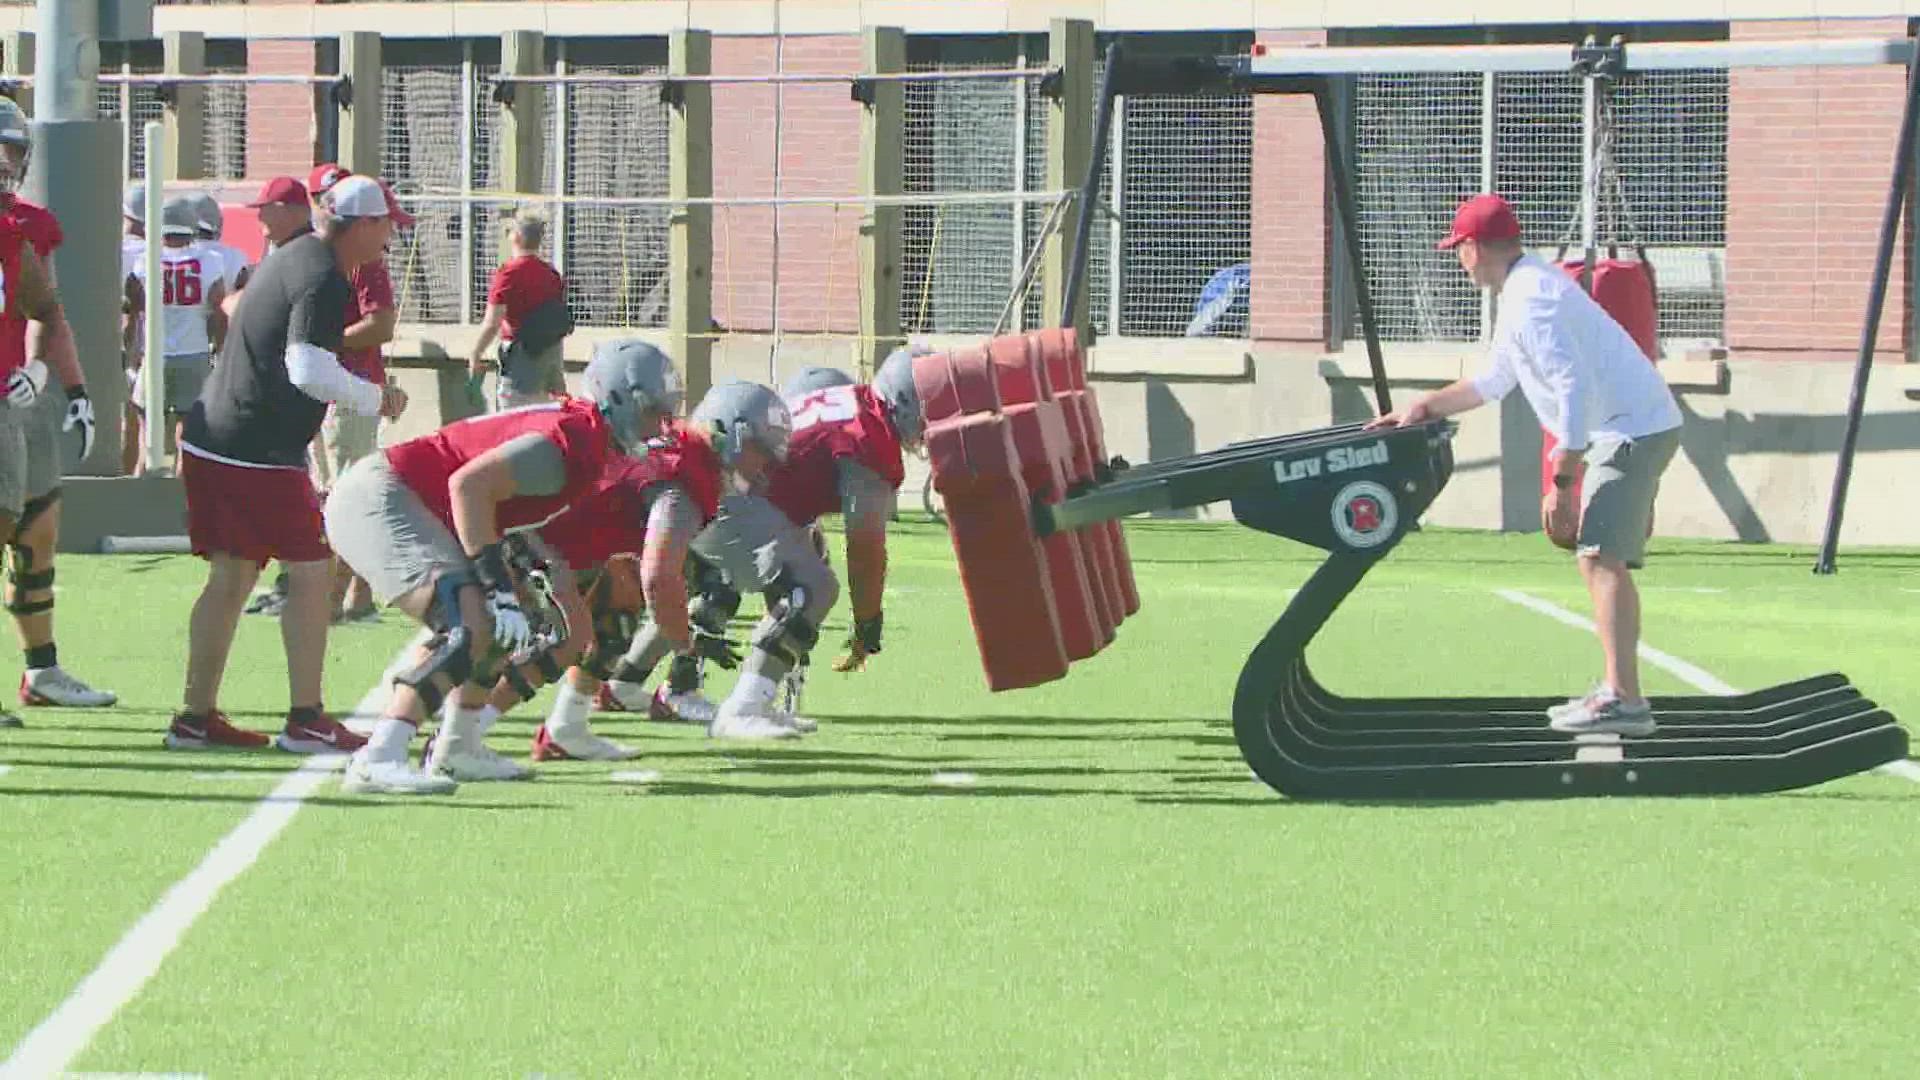 The Washington State Cougars football team started their fall practices on Wednesday with new coach Jake Dickert.